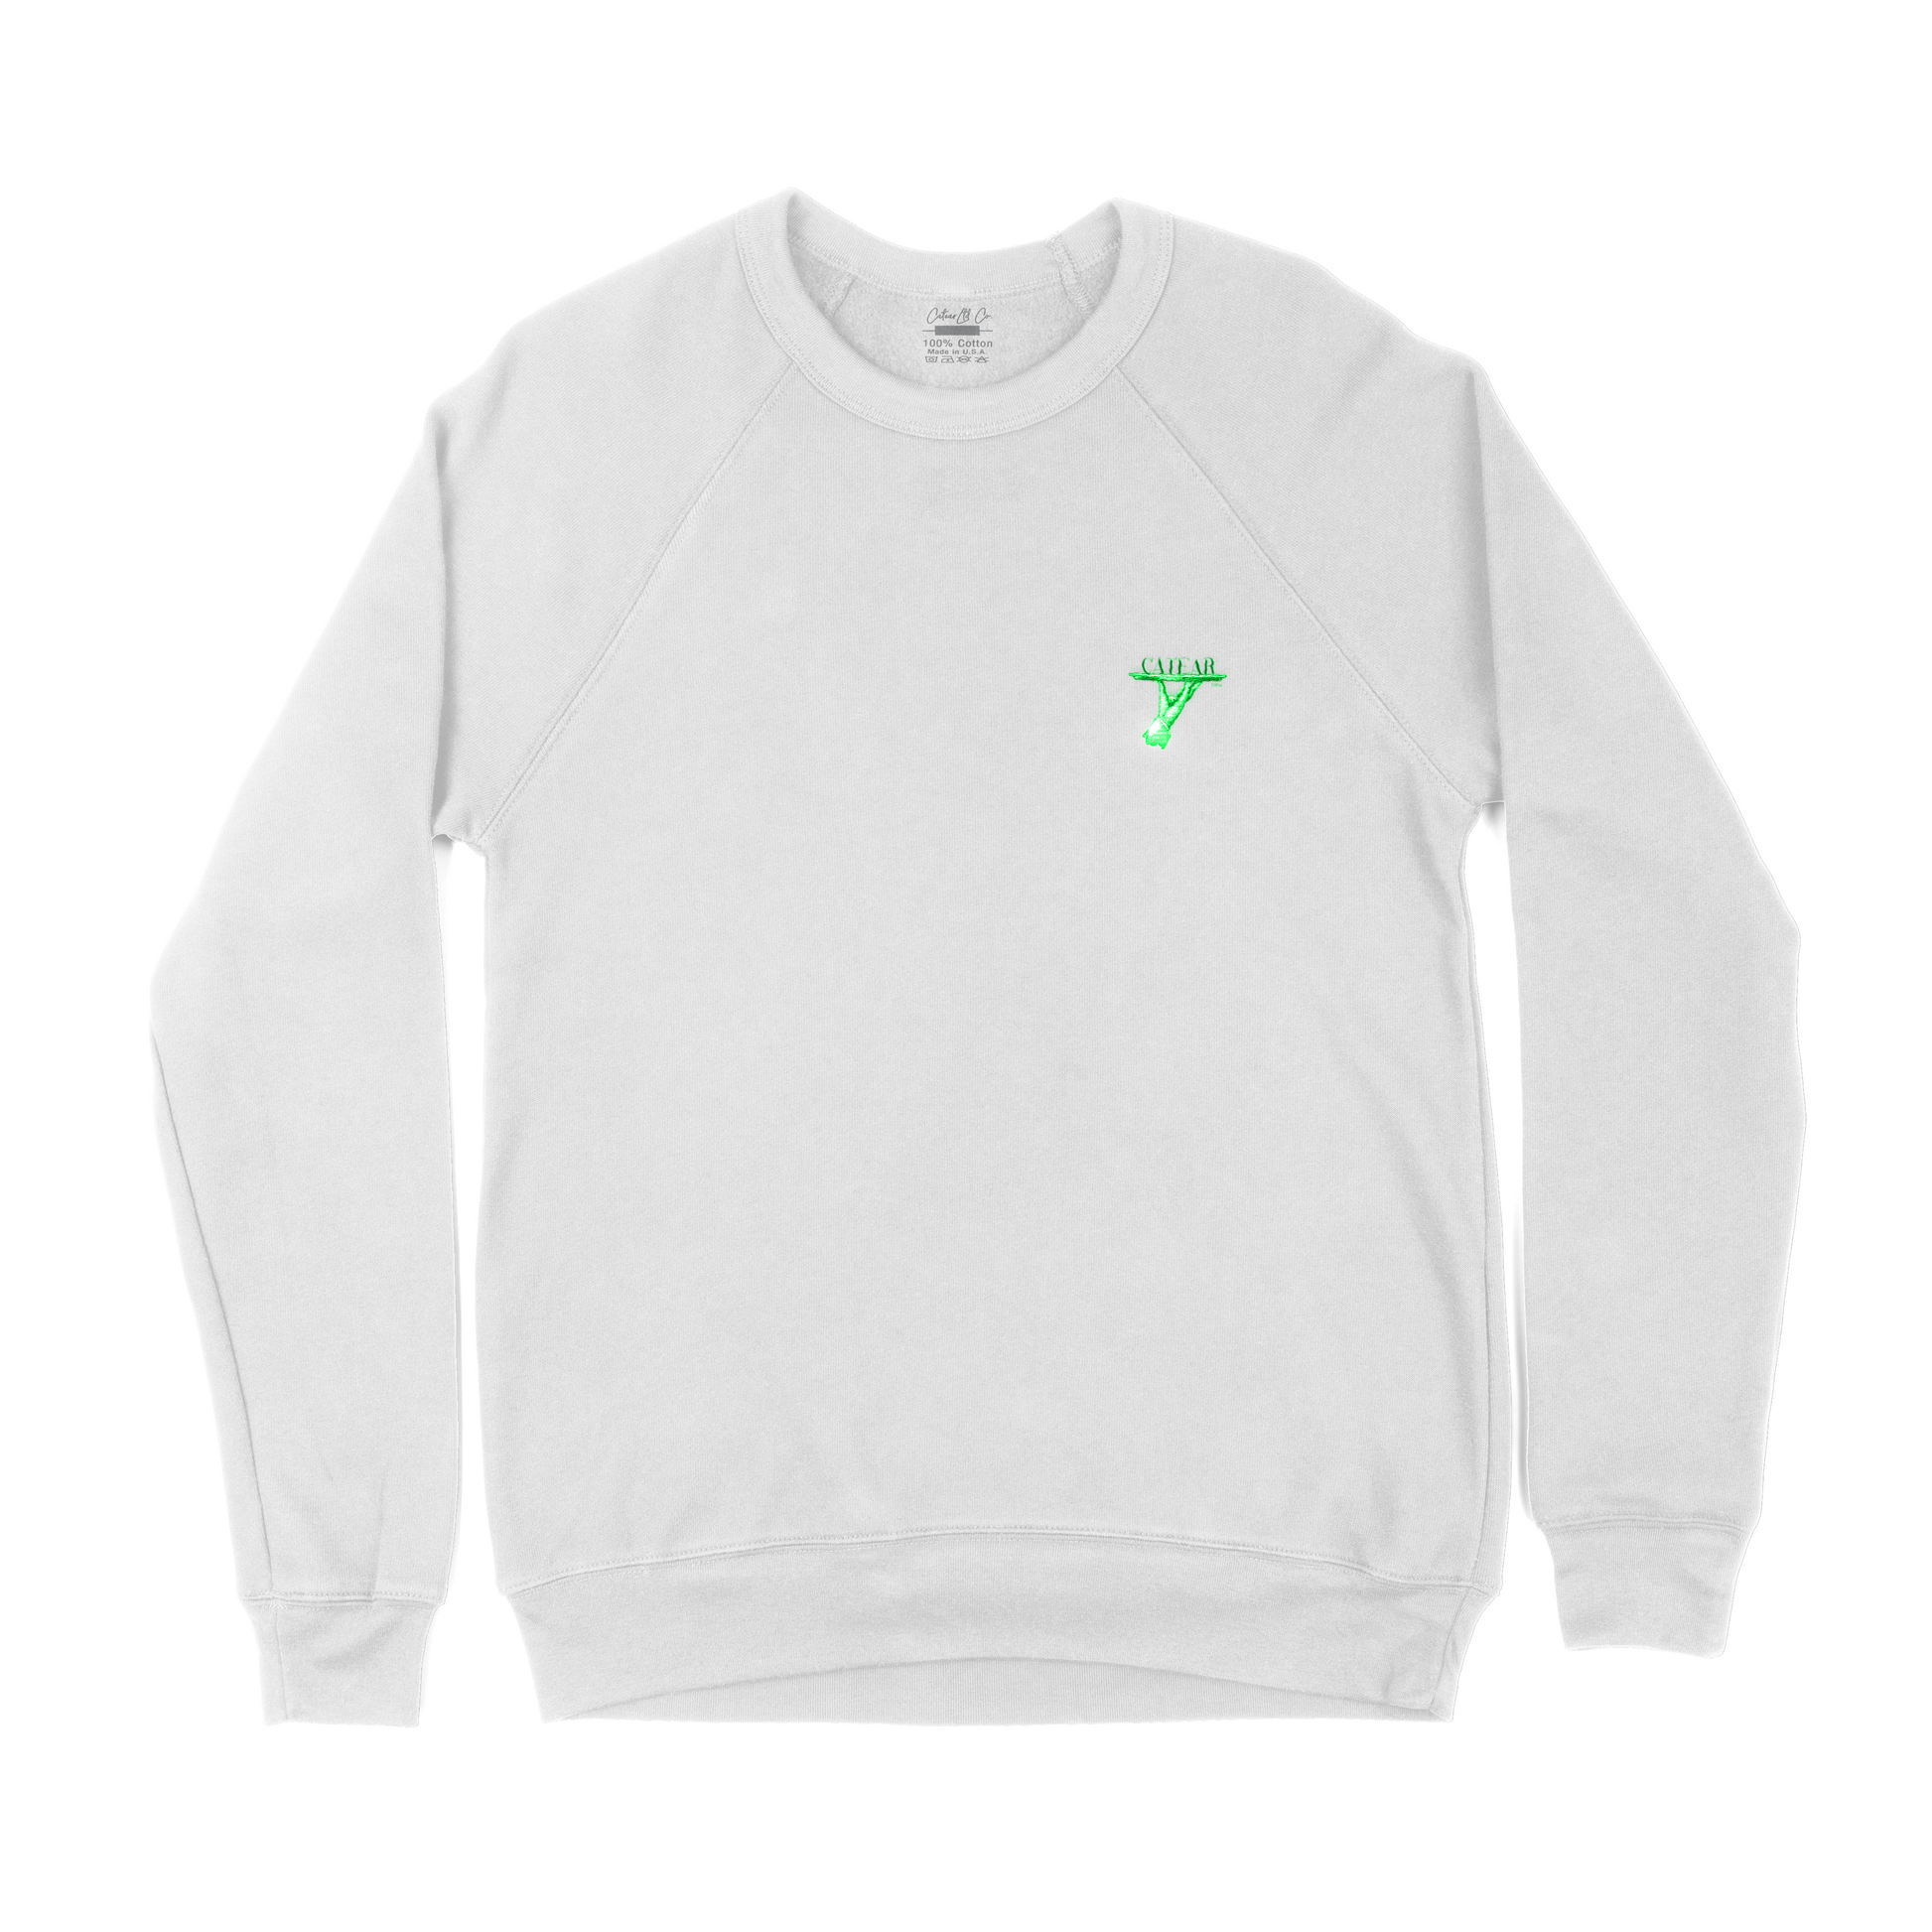 Front of White Glow On 'Em Sweatshirt with Glow in the Dark Embroidery Thread, Unisex Sizing, Ribbed Cuffs, and 3D Puff CTR Logo on Back Collar for a Unique and Comfortable Look.